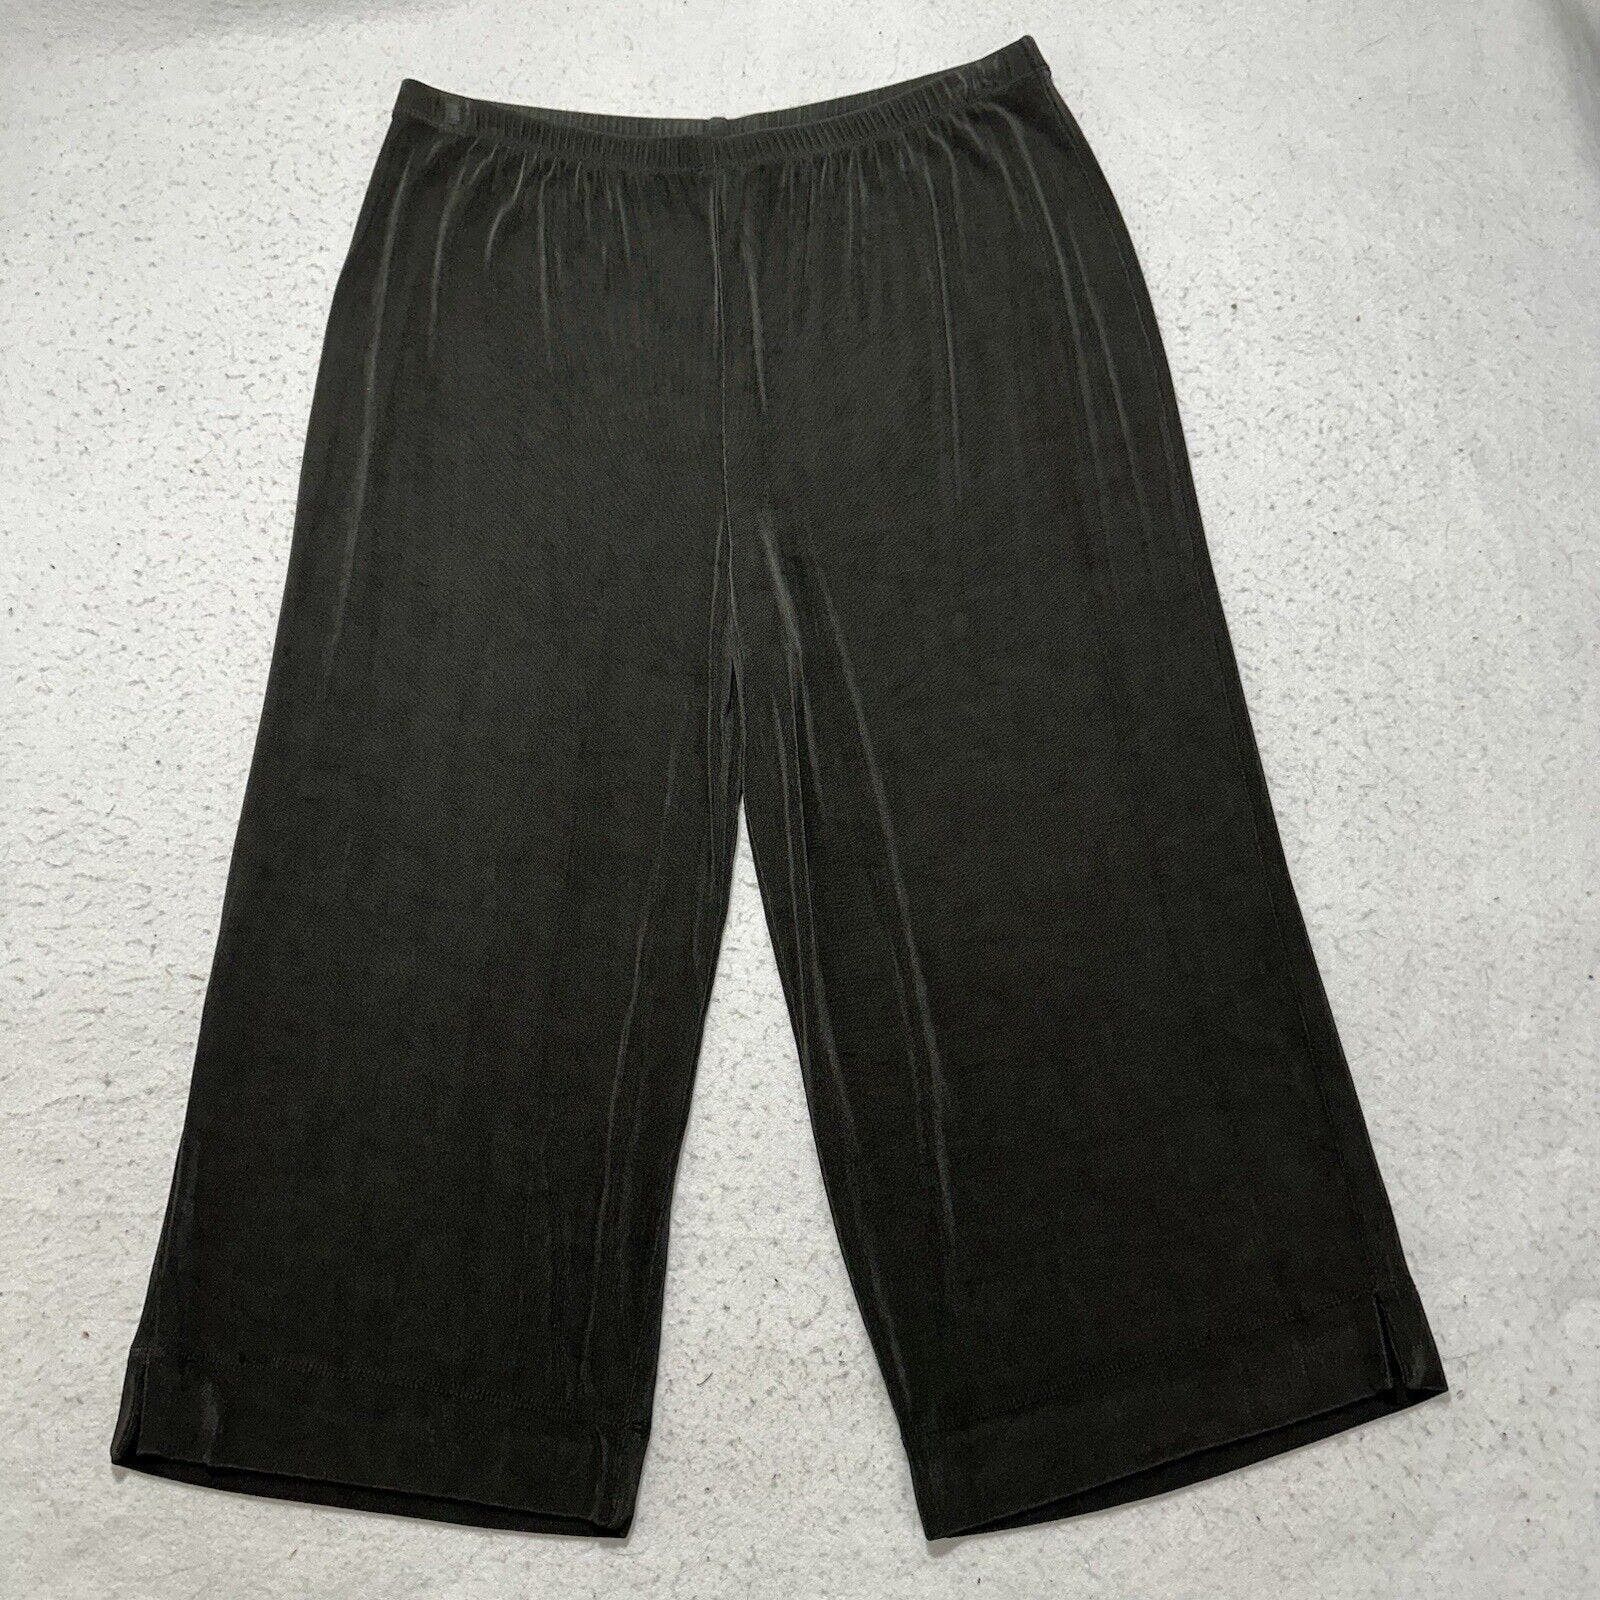 Chicos Chicos Travelers 2 Size Large Dark Brown Slinky Knit Pants